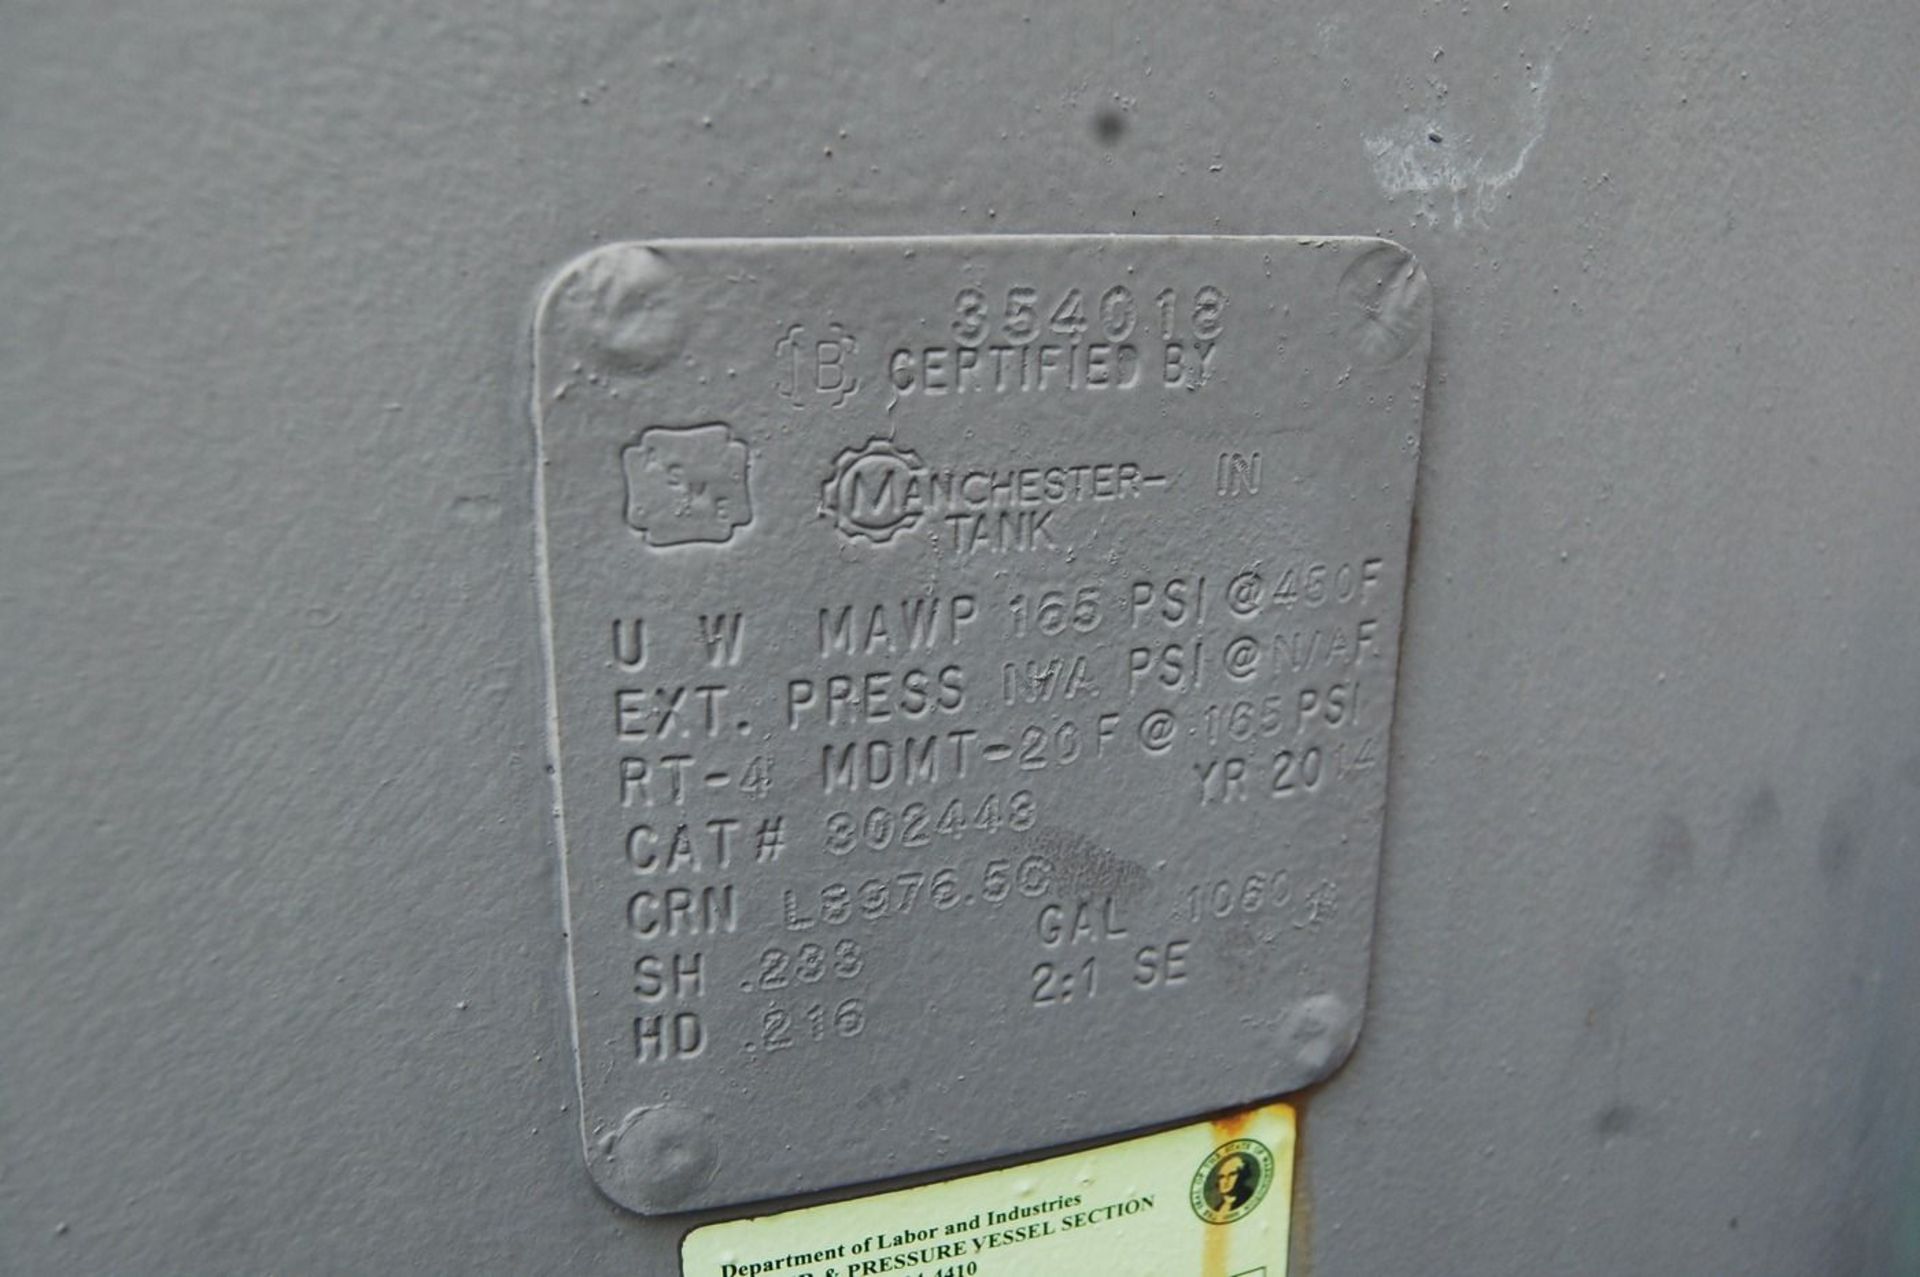 Manchester Cat # 302443 1060 Gallon Air Receiver Tank - Image 4 of 4